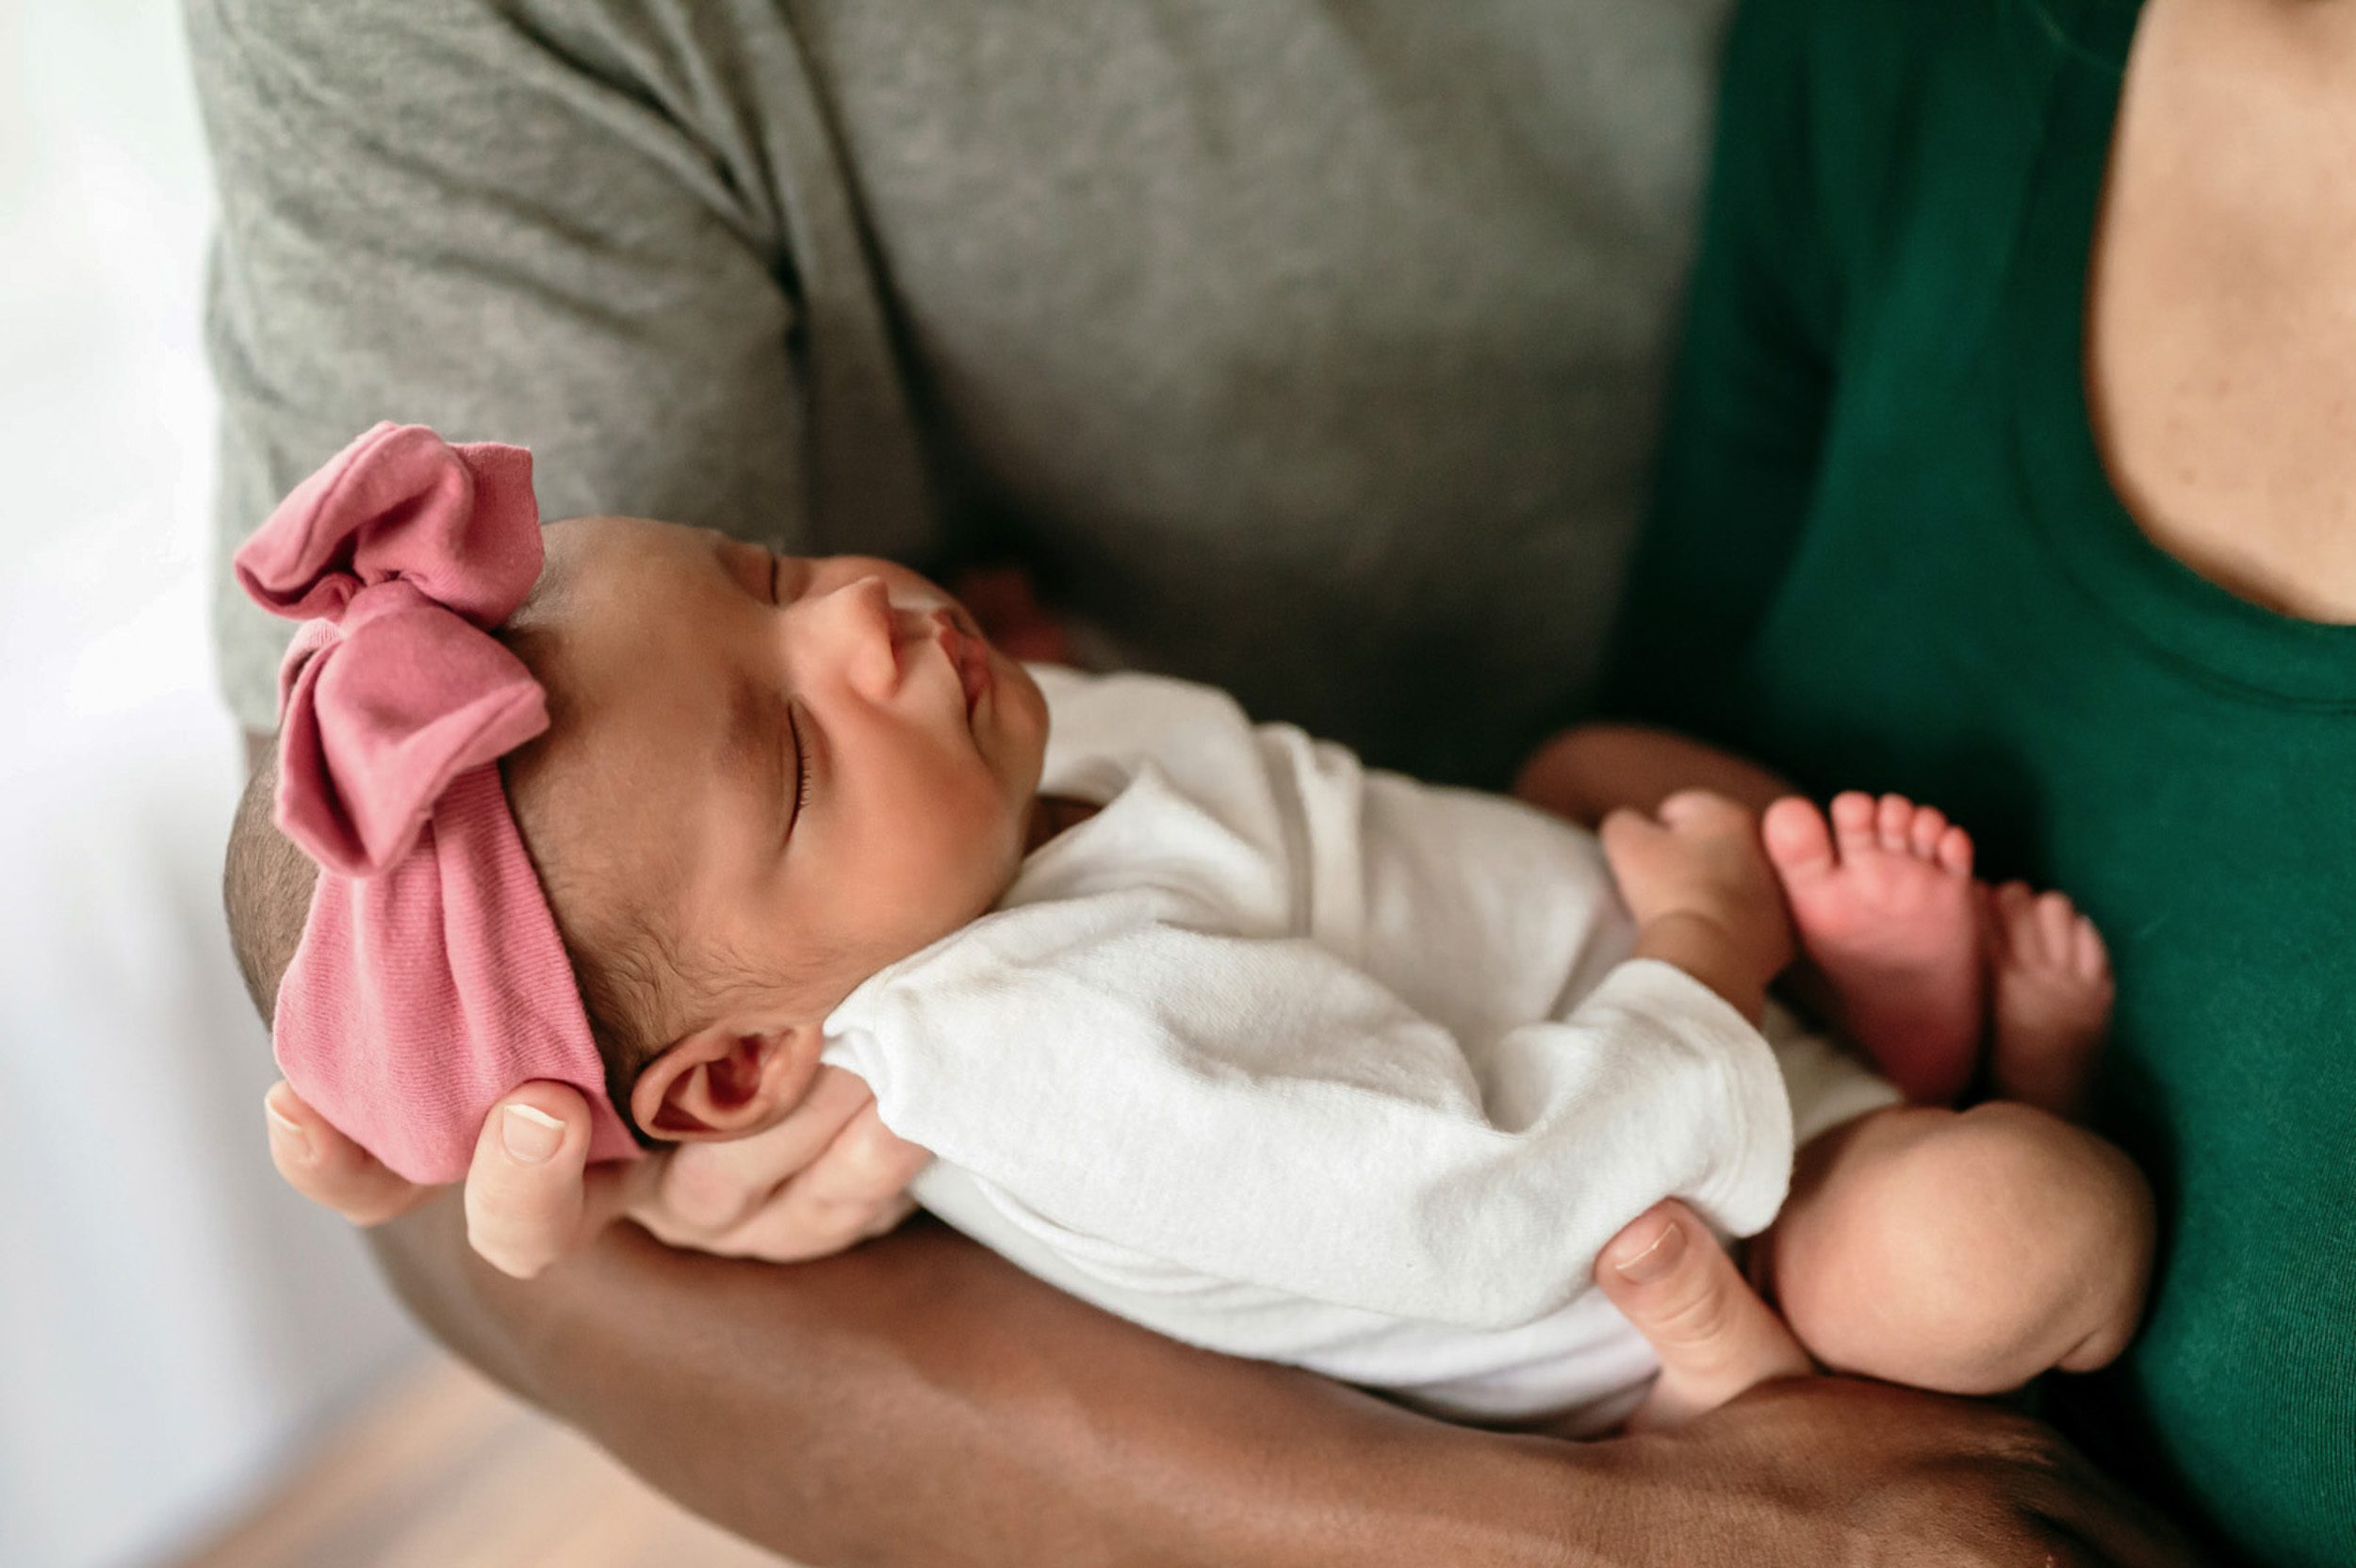 close up picture of a baby girl wearing a white onesie and pink headband nestled in her parents arms during a lifestyle newborn photoshoot